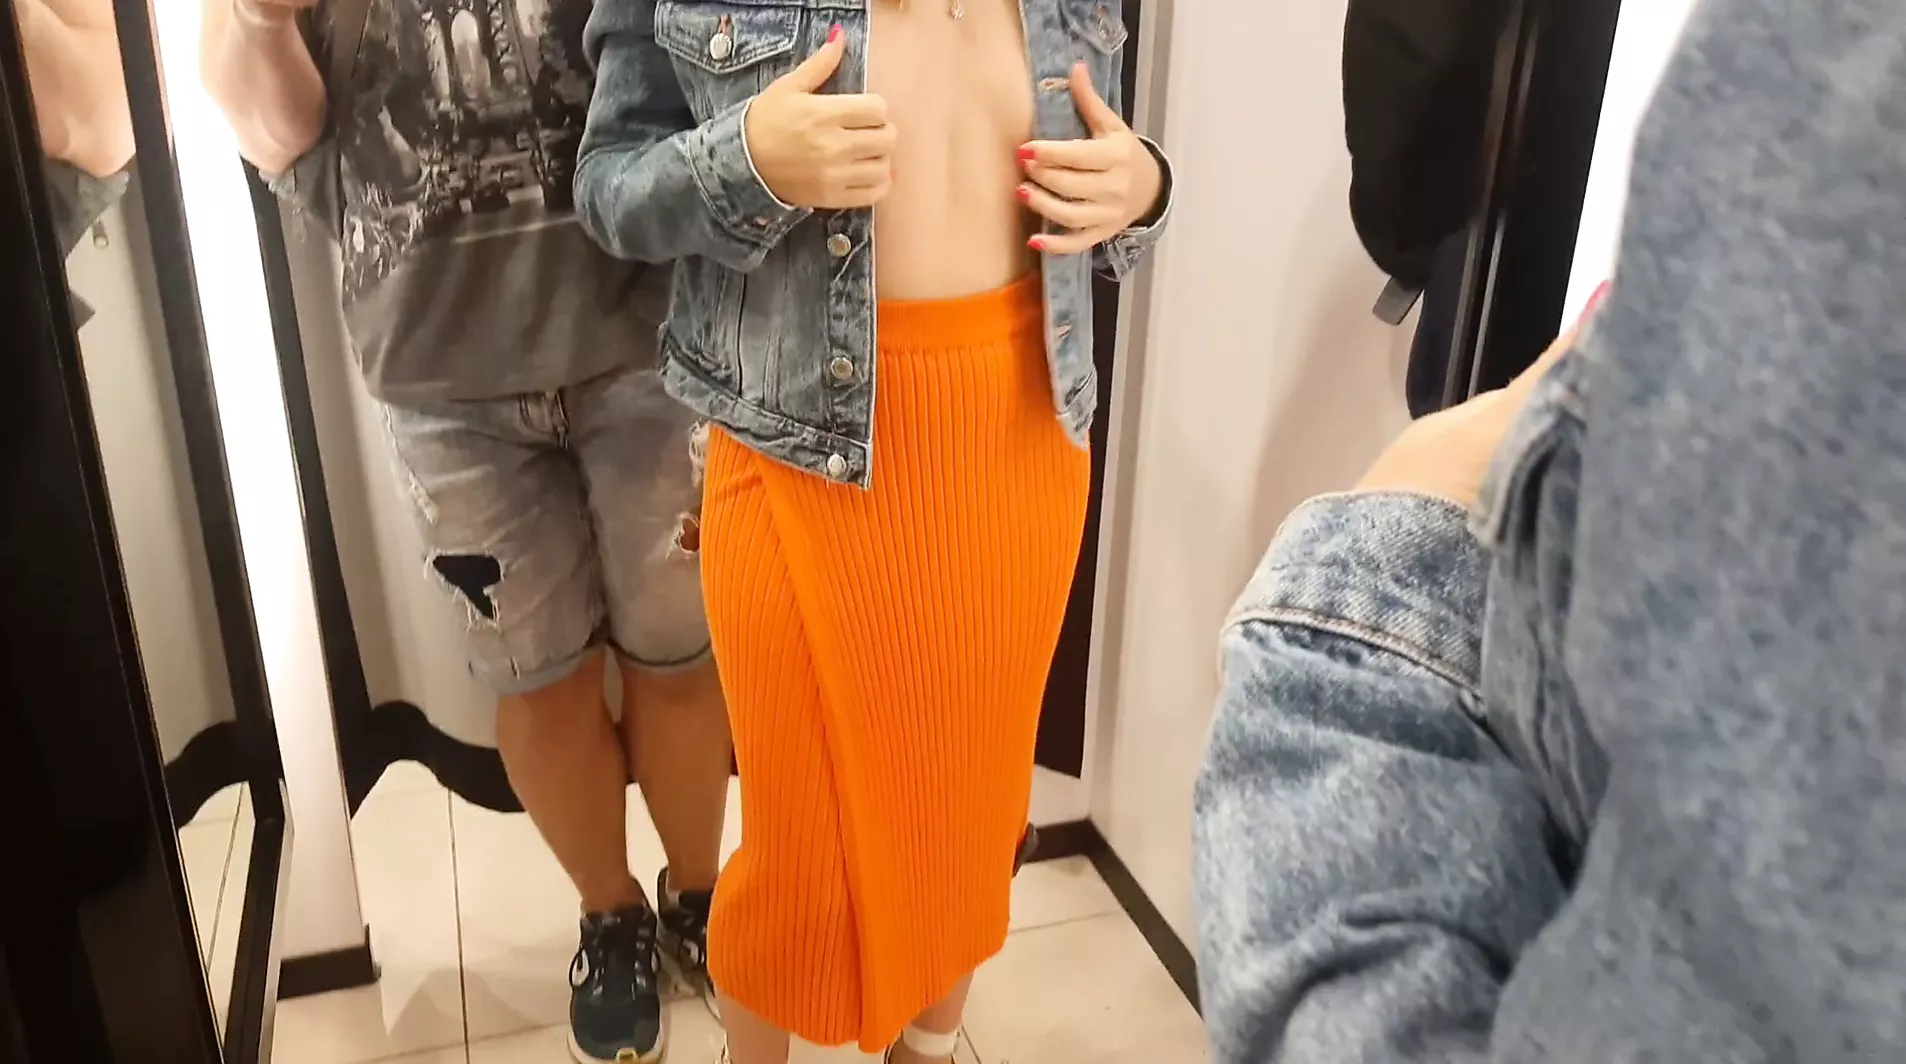 A Sexy Stranger Asked Me to look at her in the fitting Room picture